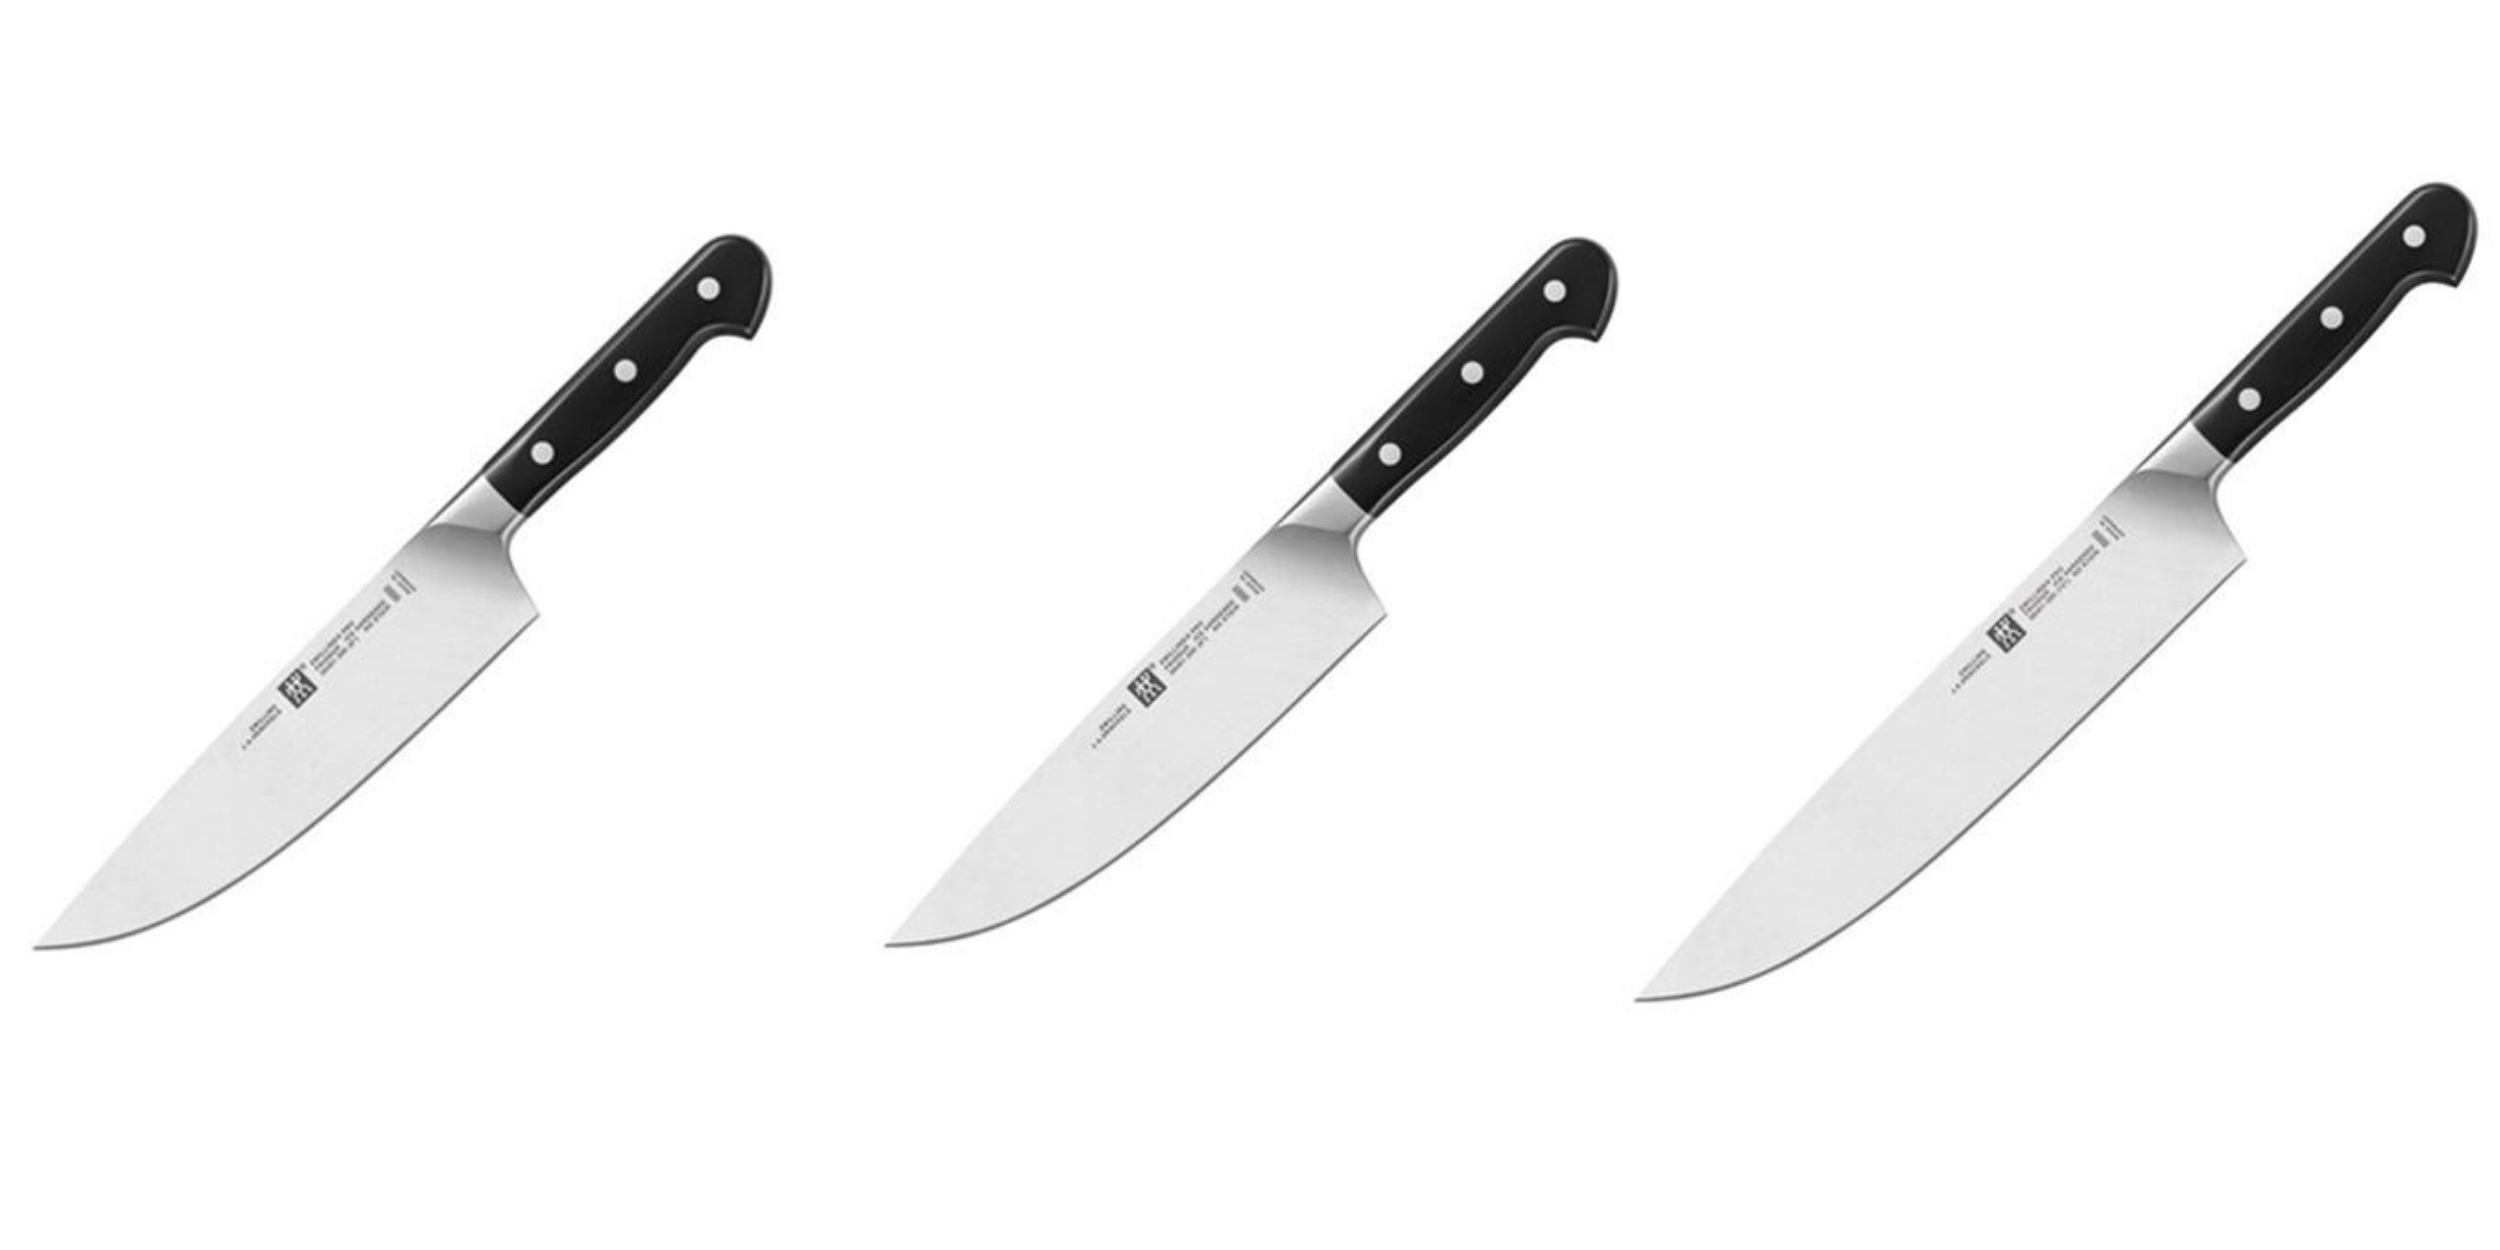 Straight back chef knife with black handle and 3 rivets